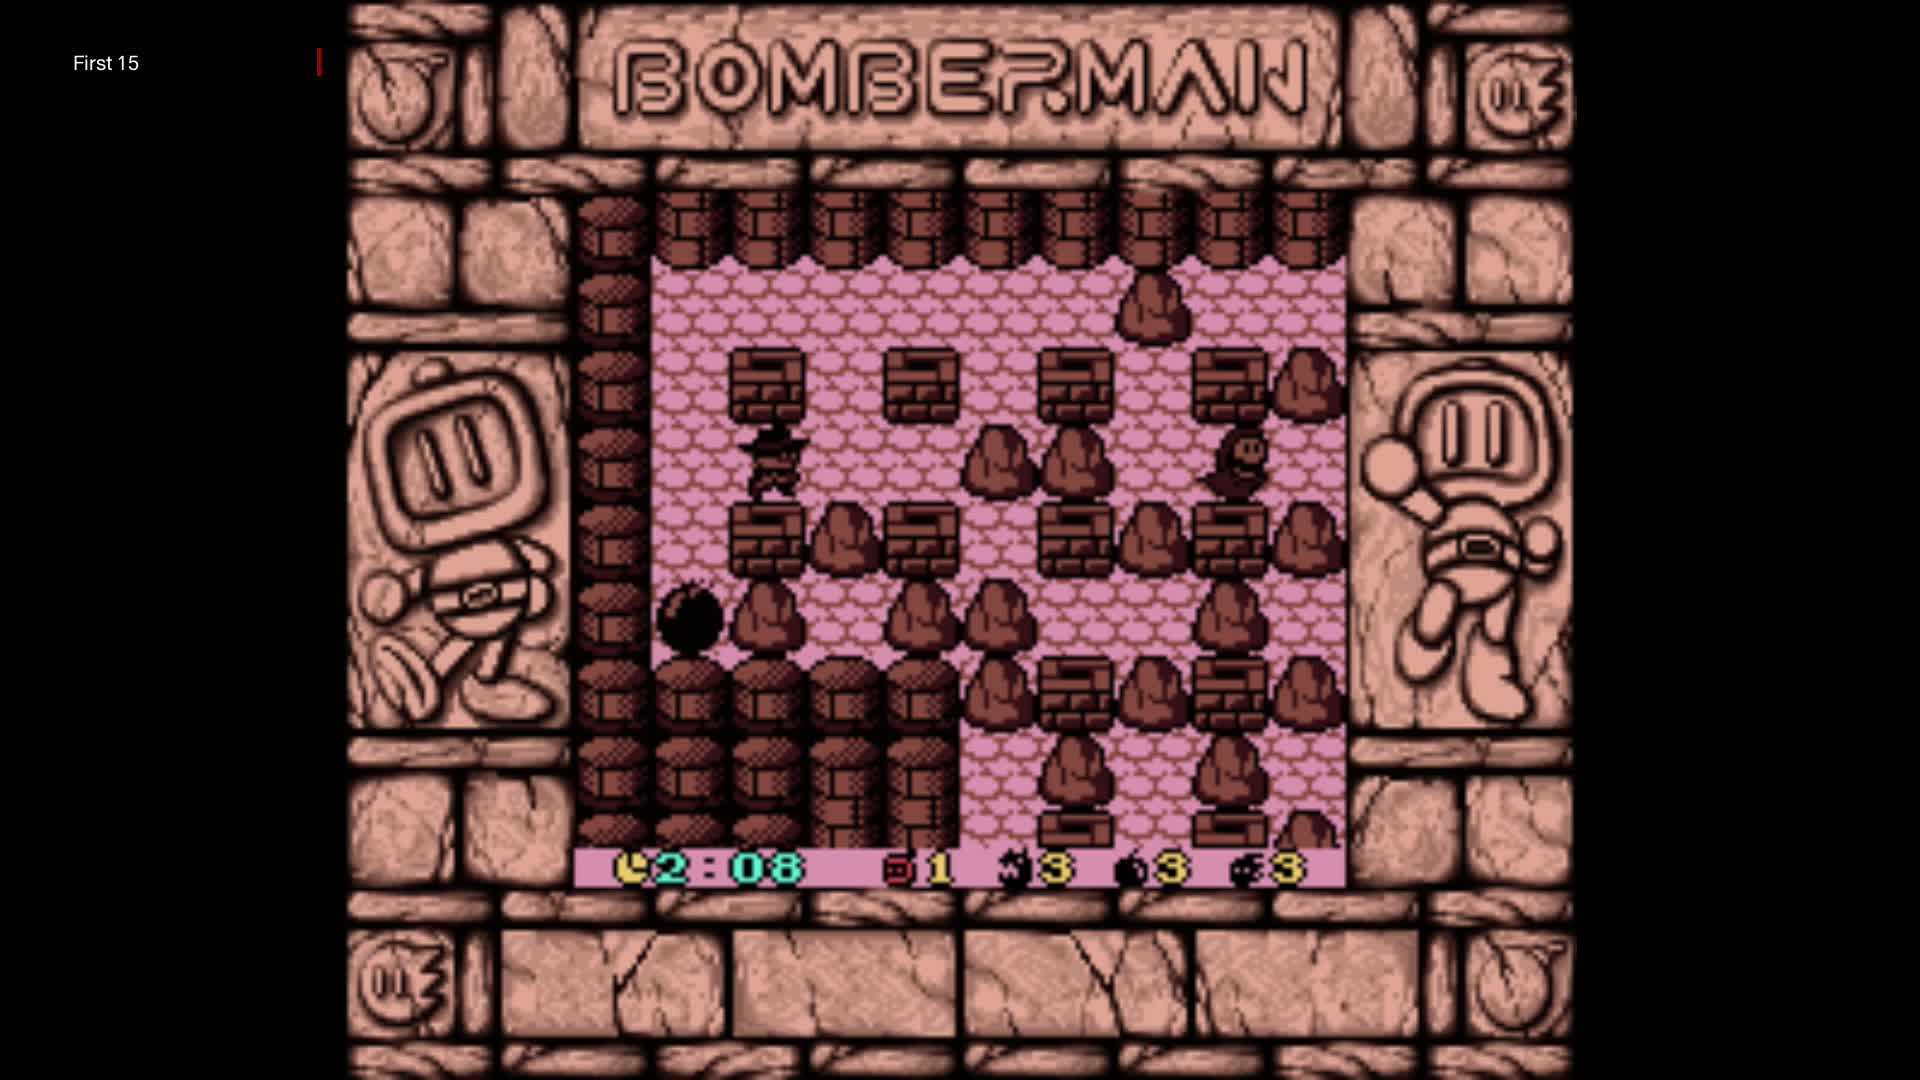 The First 15 Mintues of Bomberman Collection: Bomberman GB 2 (Game Boy)